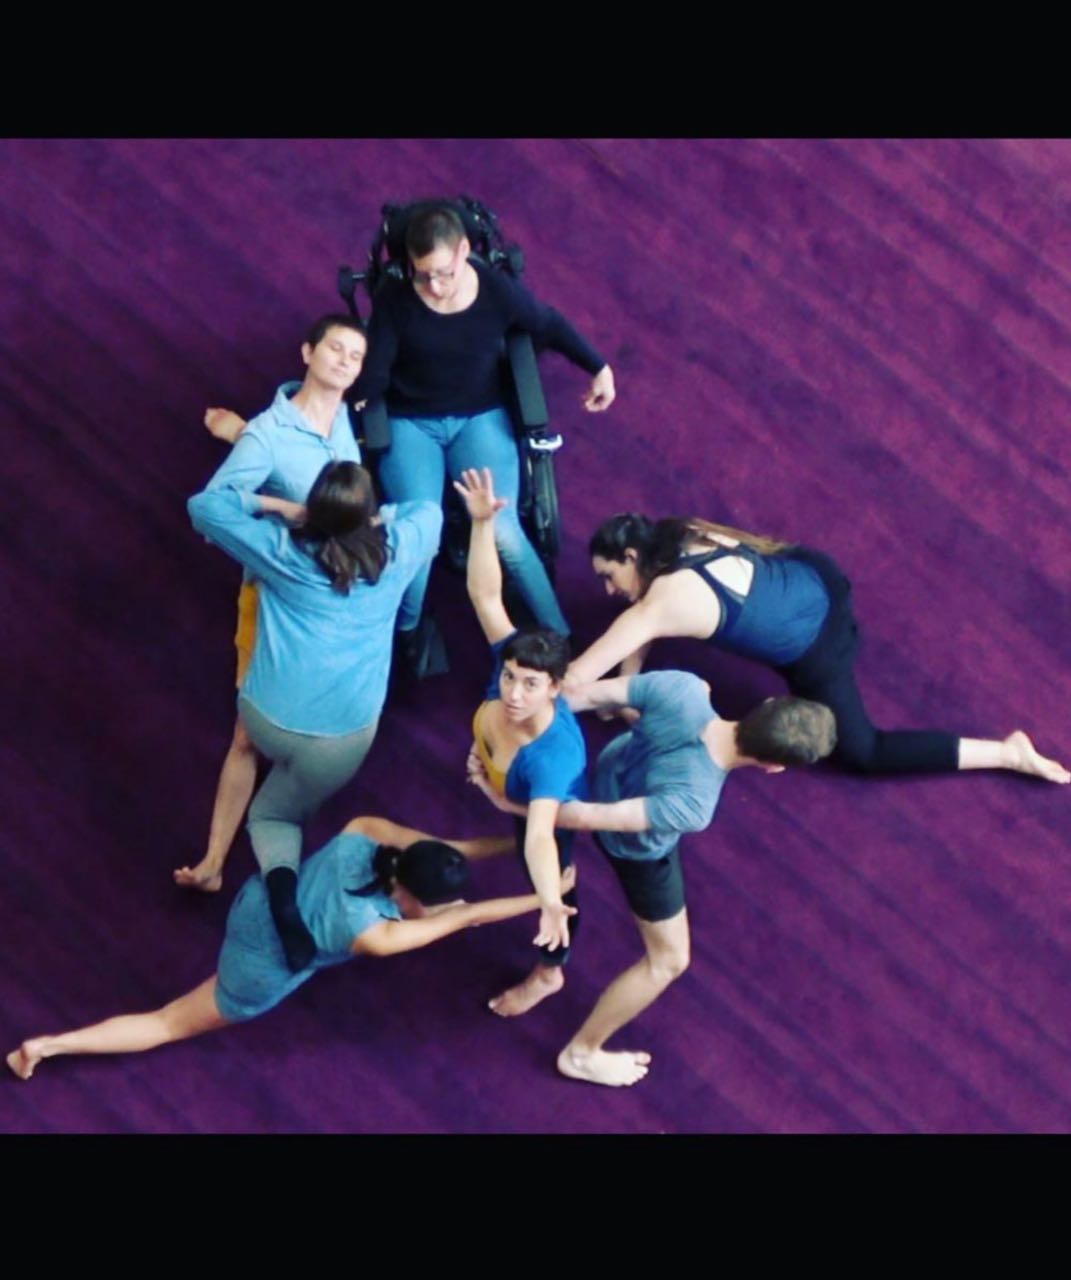 Photo taken from above where people with and without disabilities have created a sculpture. Everyones gaze is up towards the camera. All the dancers are wearing clothes in different shades of blue and black.